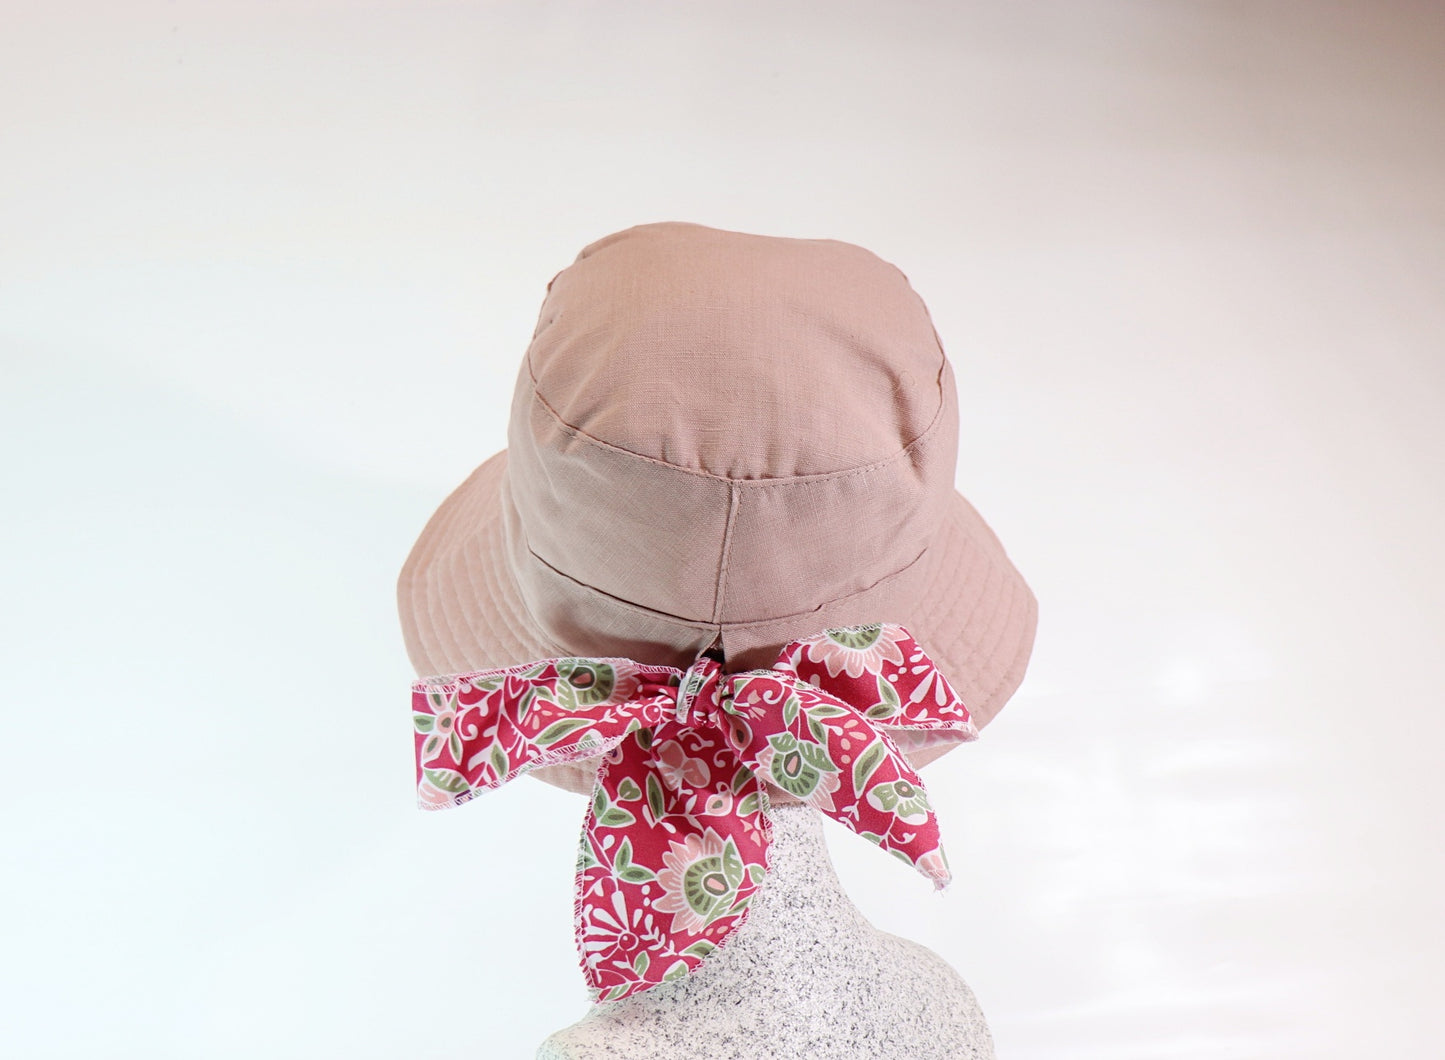 Ladies linen hat with bow